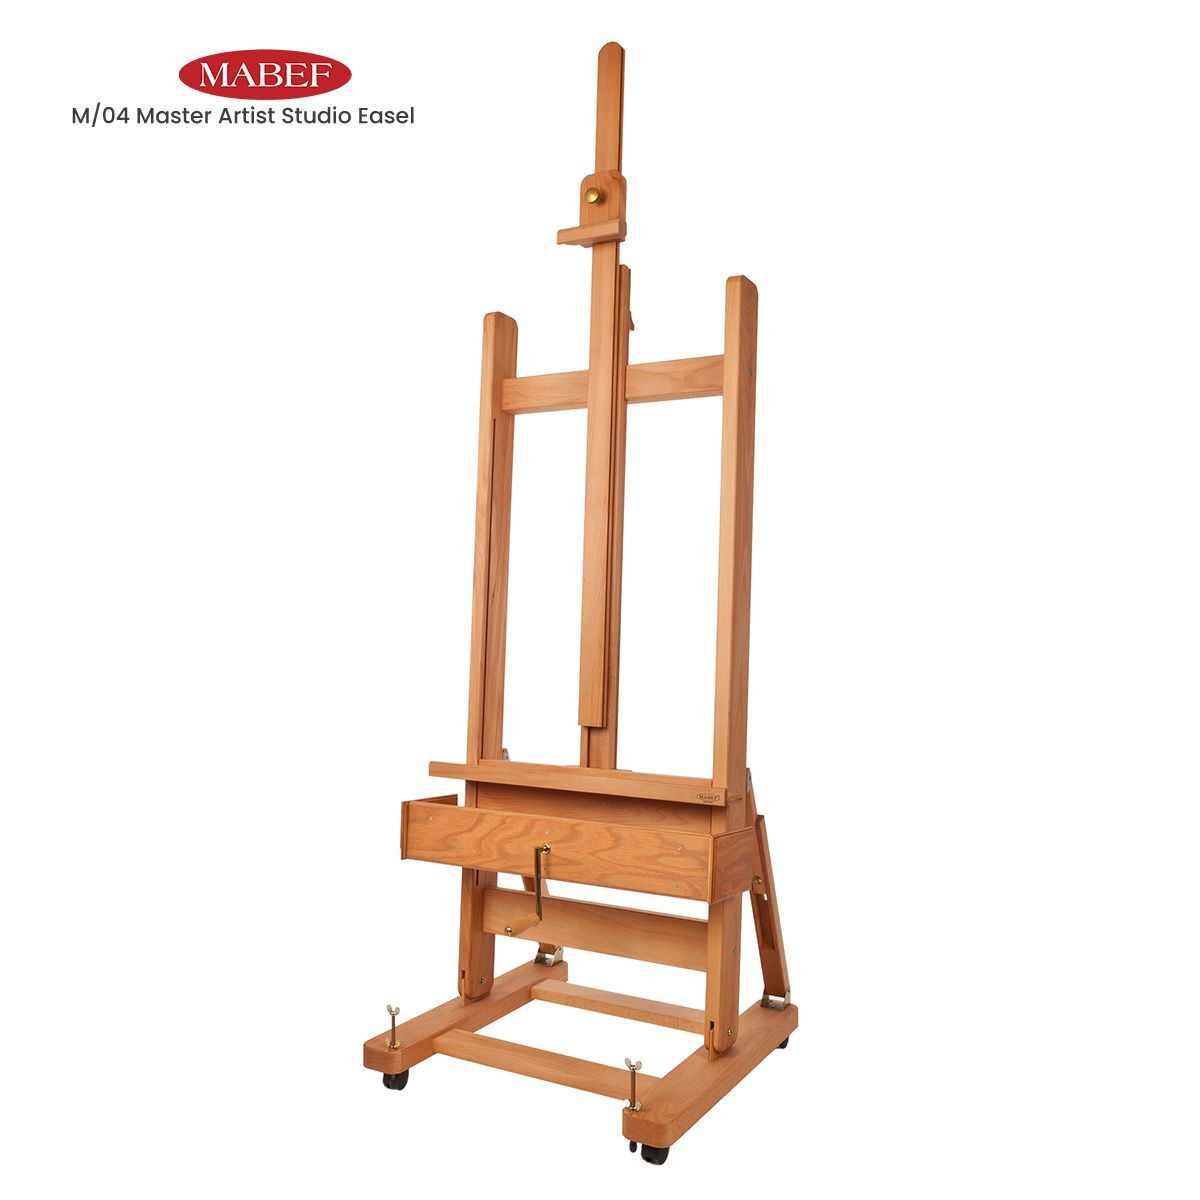 Mabef M/04 Master Artist Studio Easel With Crank